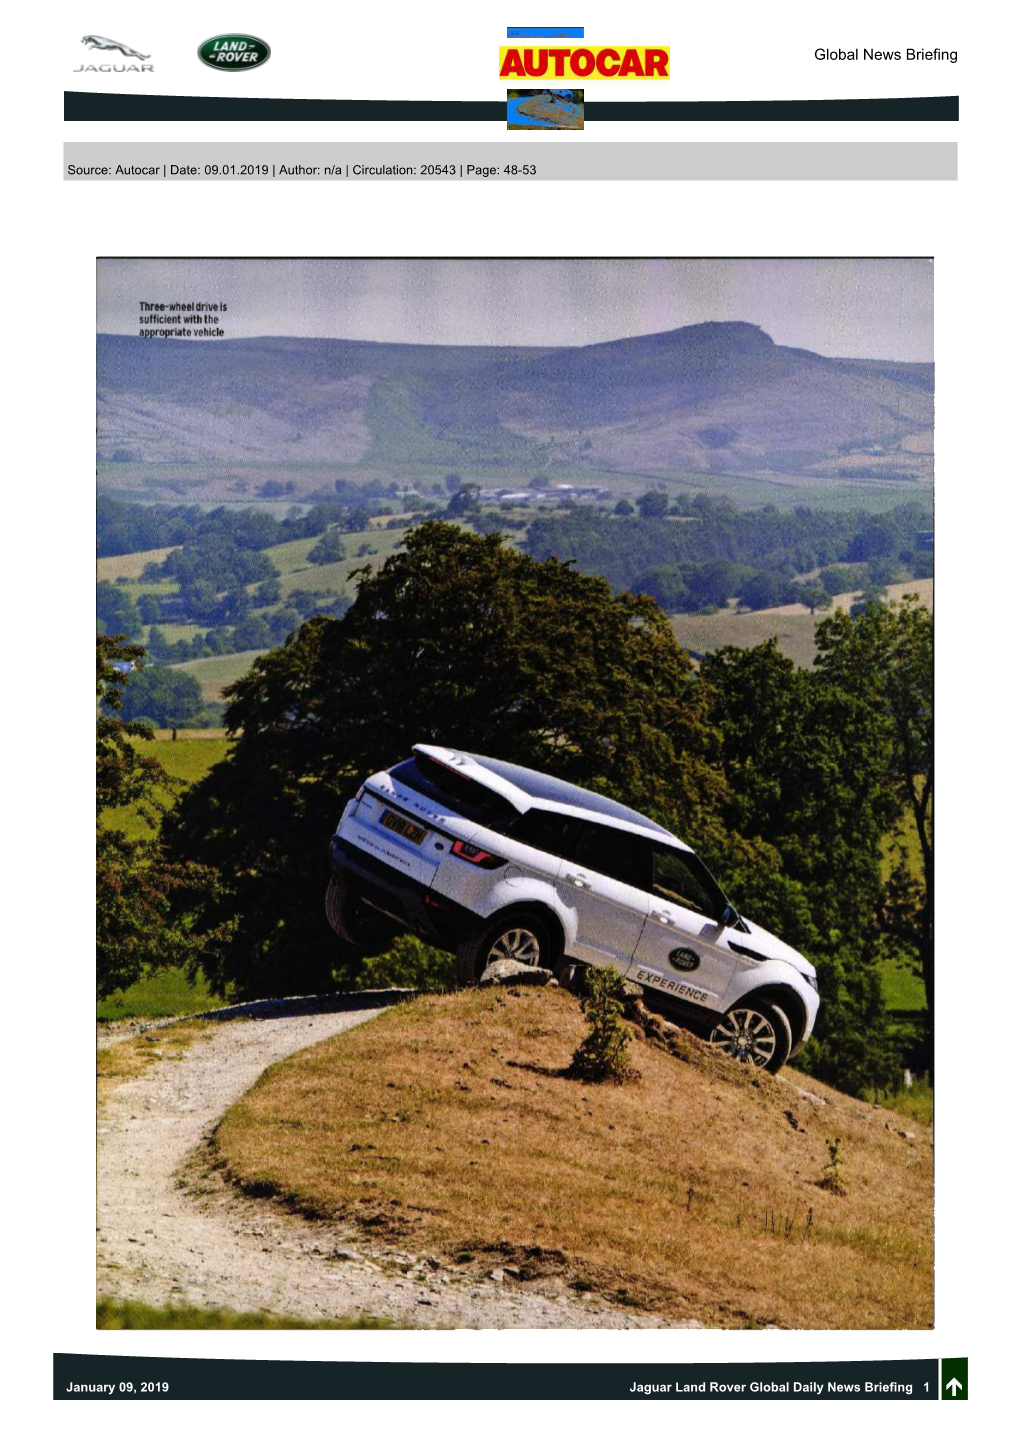 January 09, 2019 Jaguar Land Rover Global Daily News Briefing 1 D Source: Autocar | Date: 09.01.2019 | Author: N/A | Circulation: 20543 | Page: 48-53